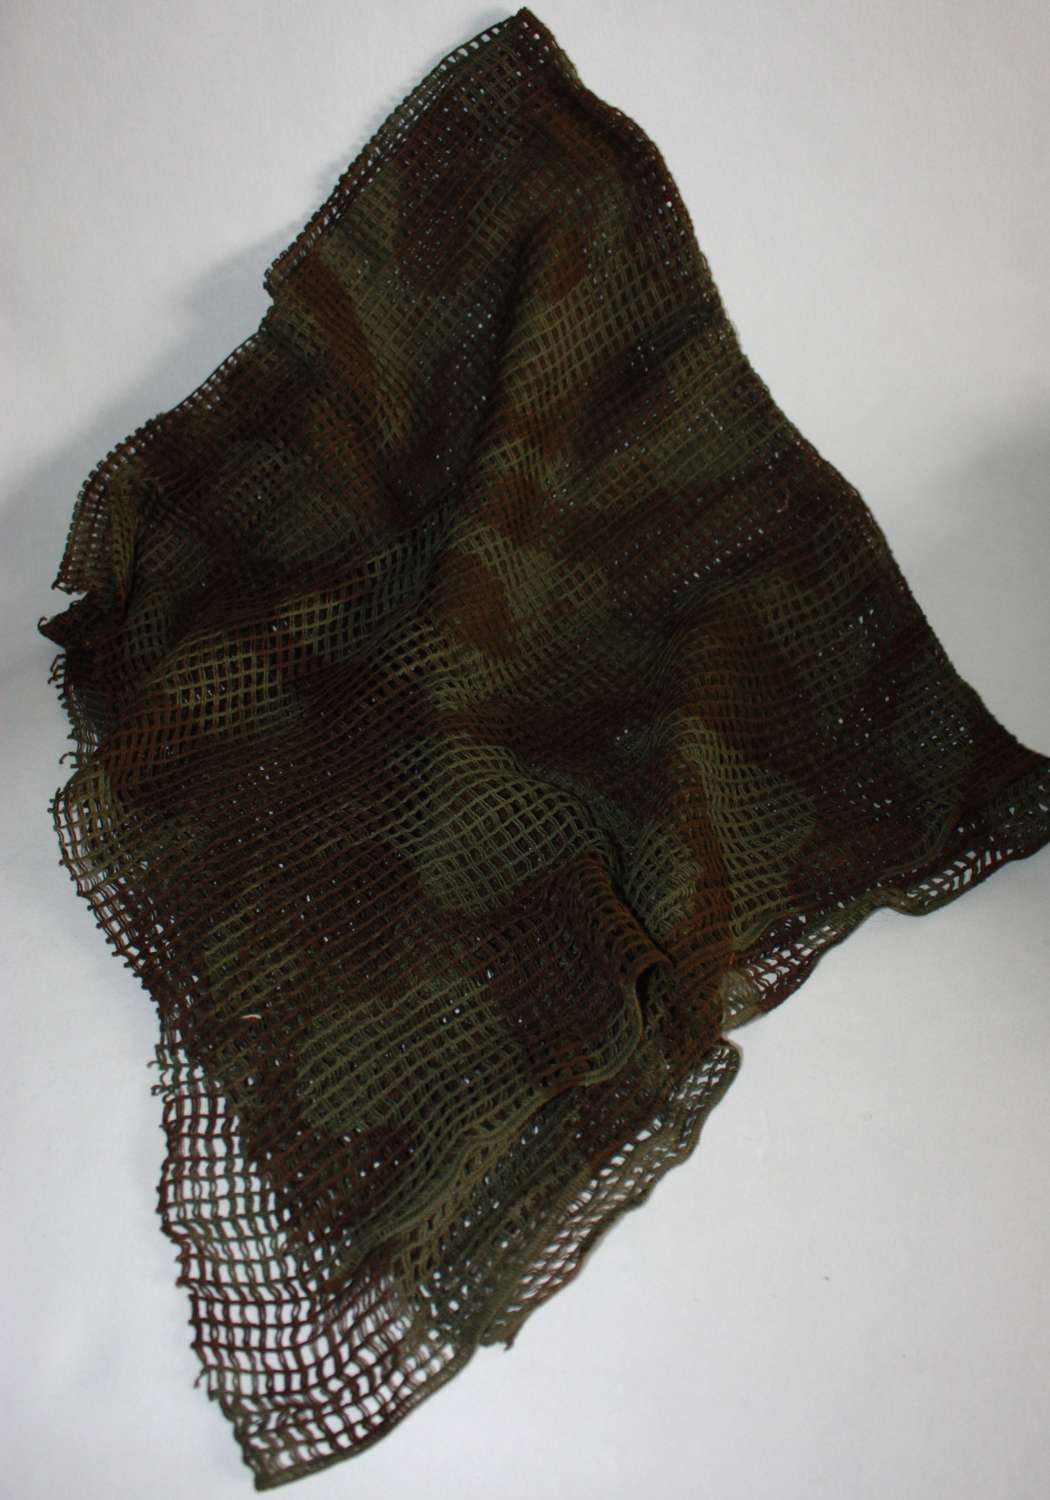 A VERY GOOD EXAMPLE OF THE BRITISH ISSUE CAMOFLAGE SCARF